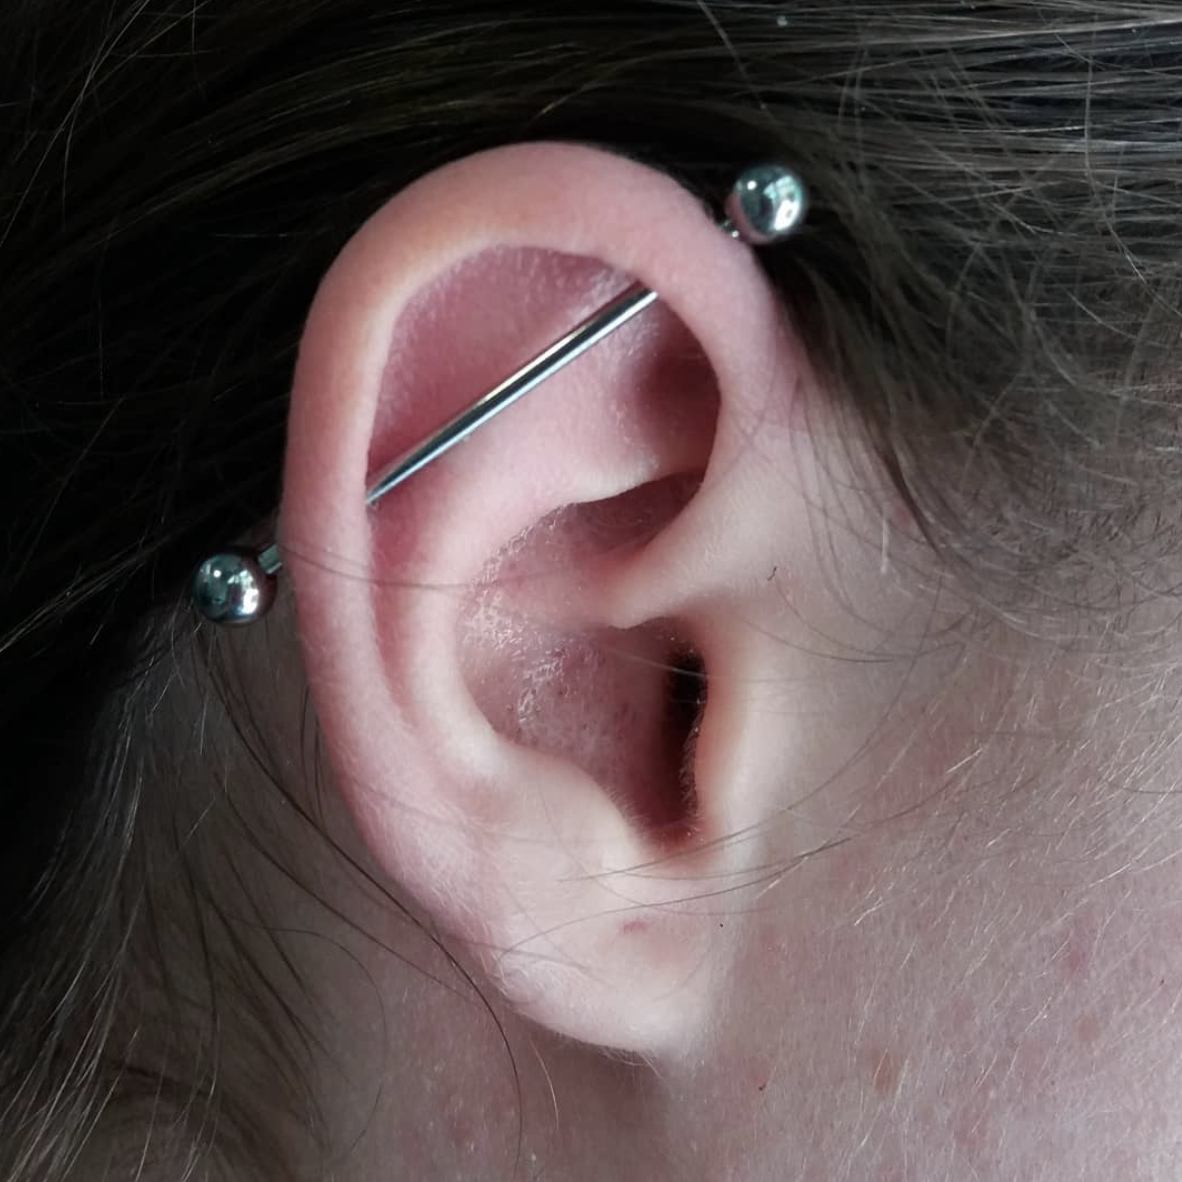 ENTITY reports on everything you need to know about getting an ear piercing